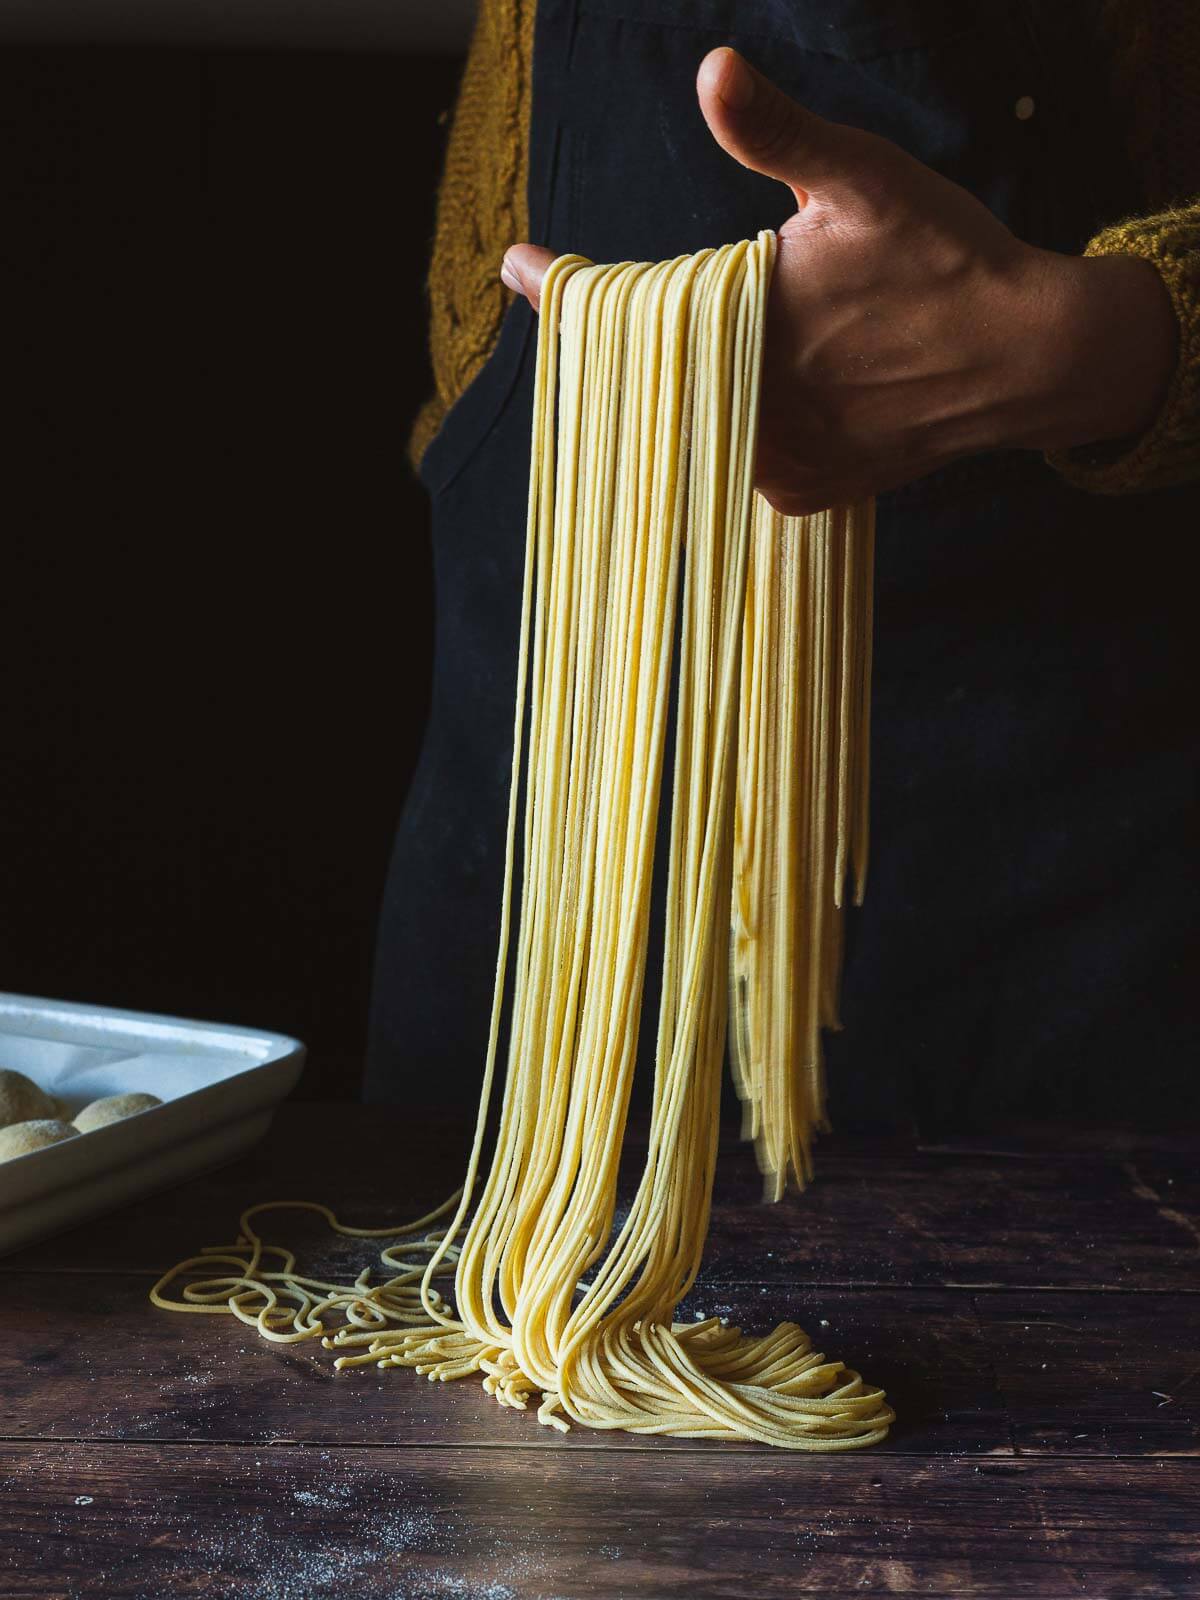 holding pasta noodles with a hand